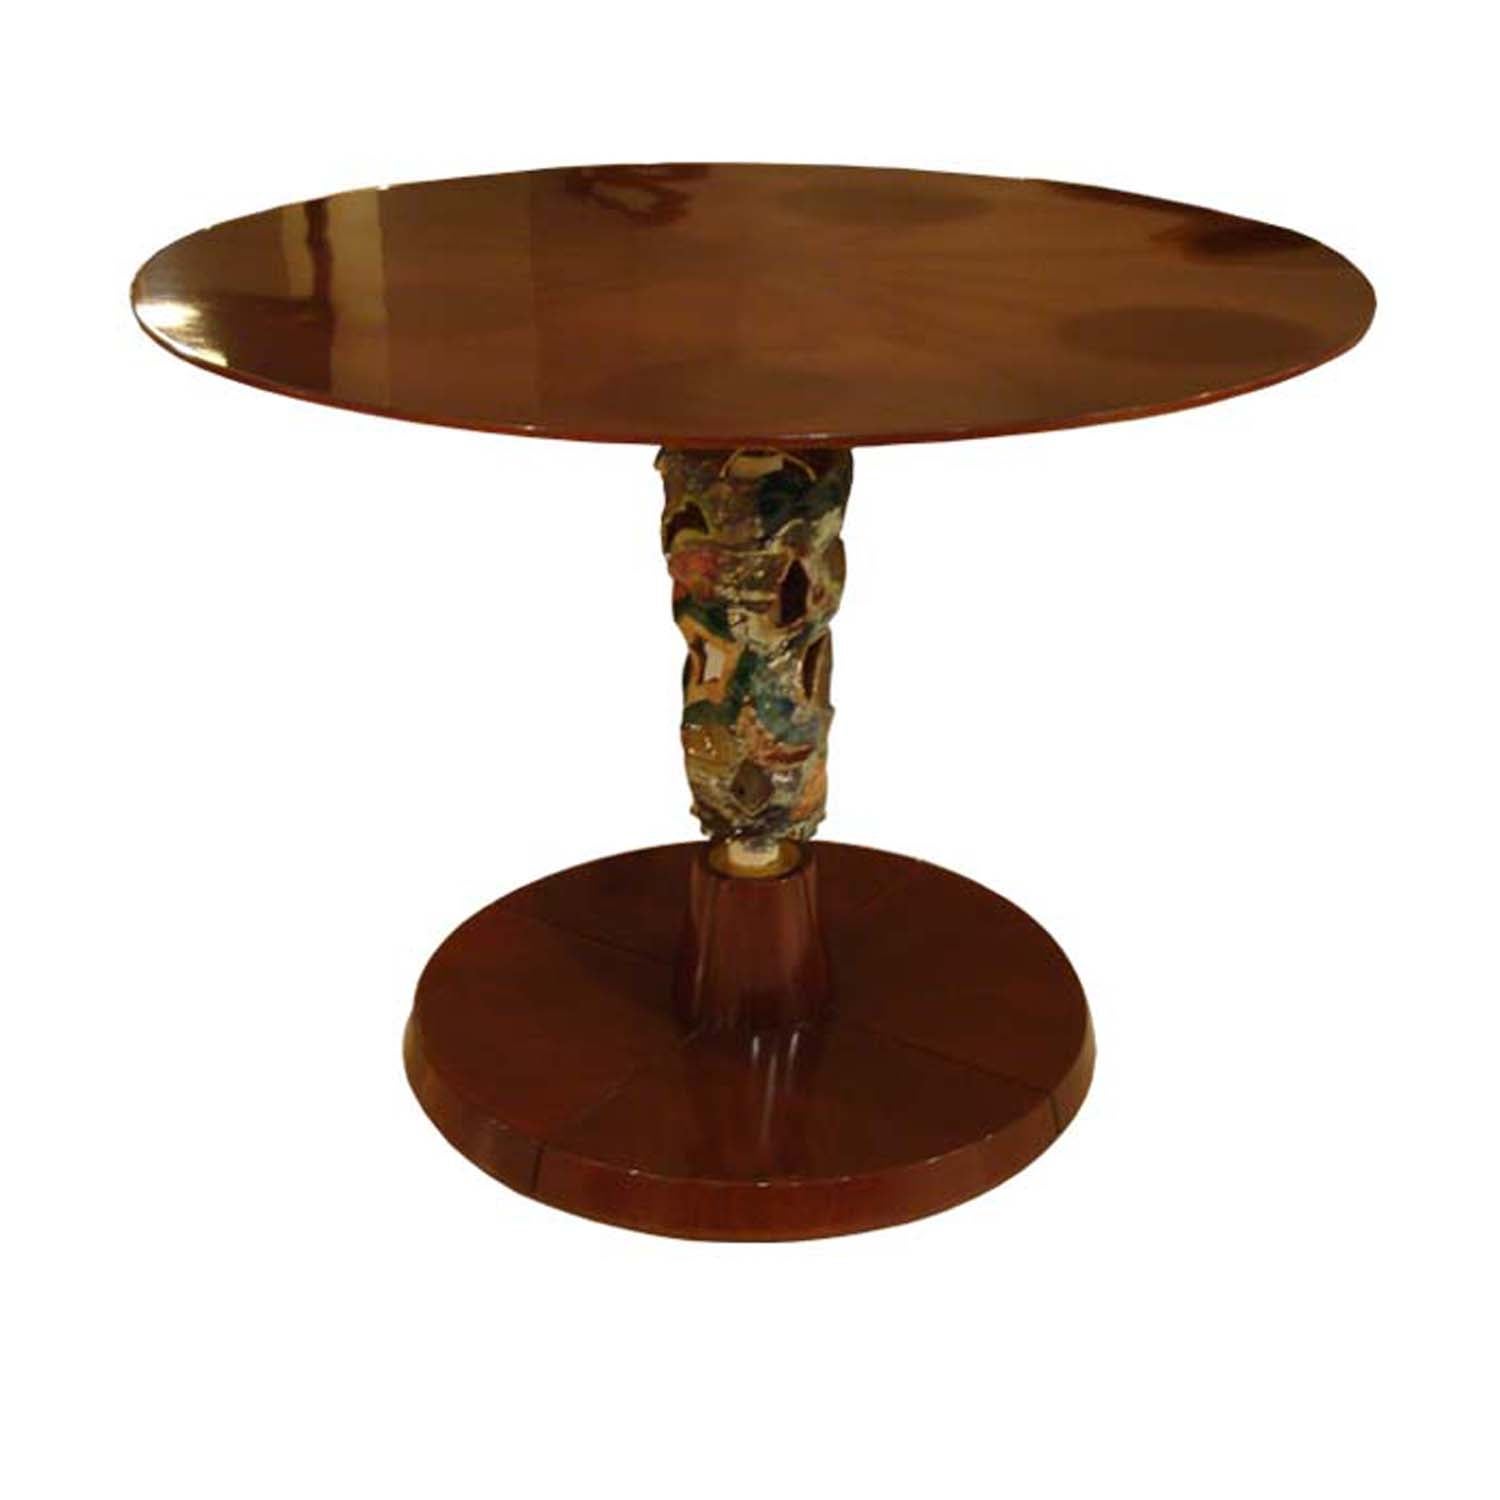 A Center Table In Mahogany With Ceramic Work By Pietro Melandri For Sale